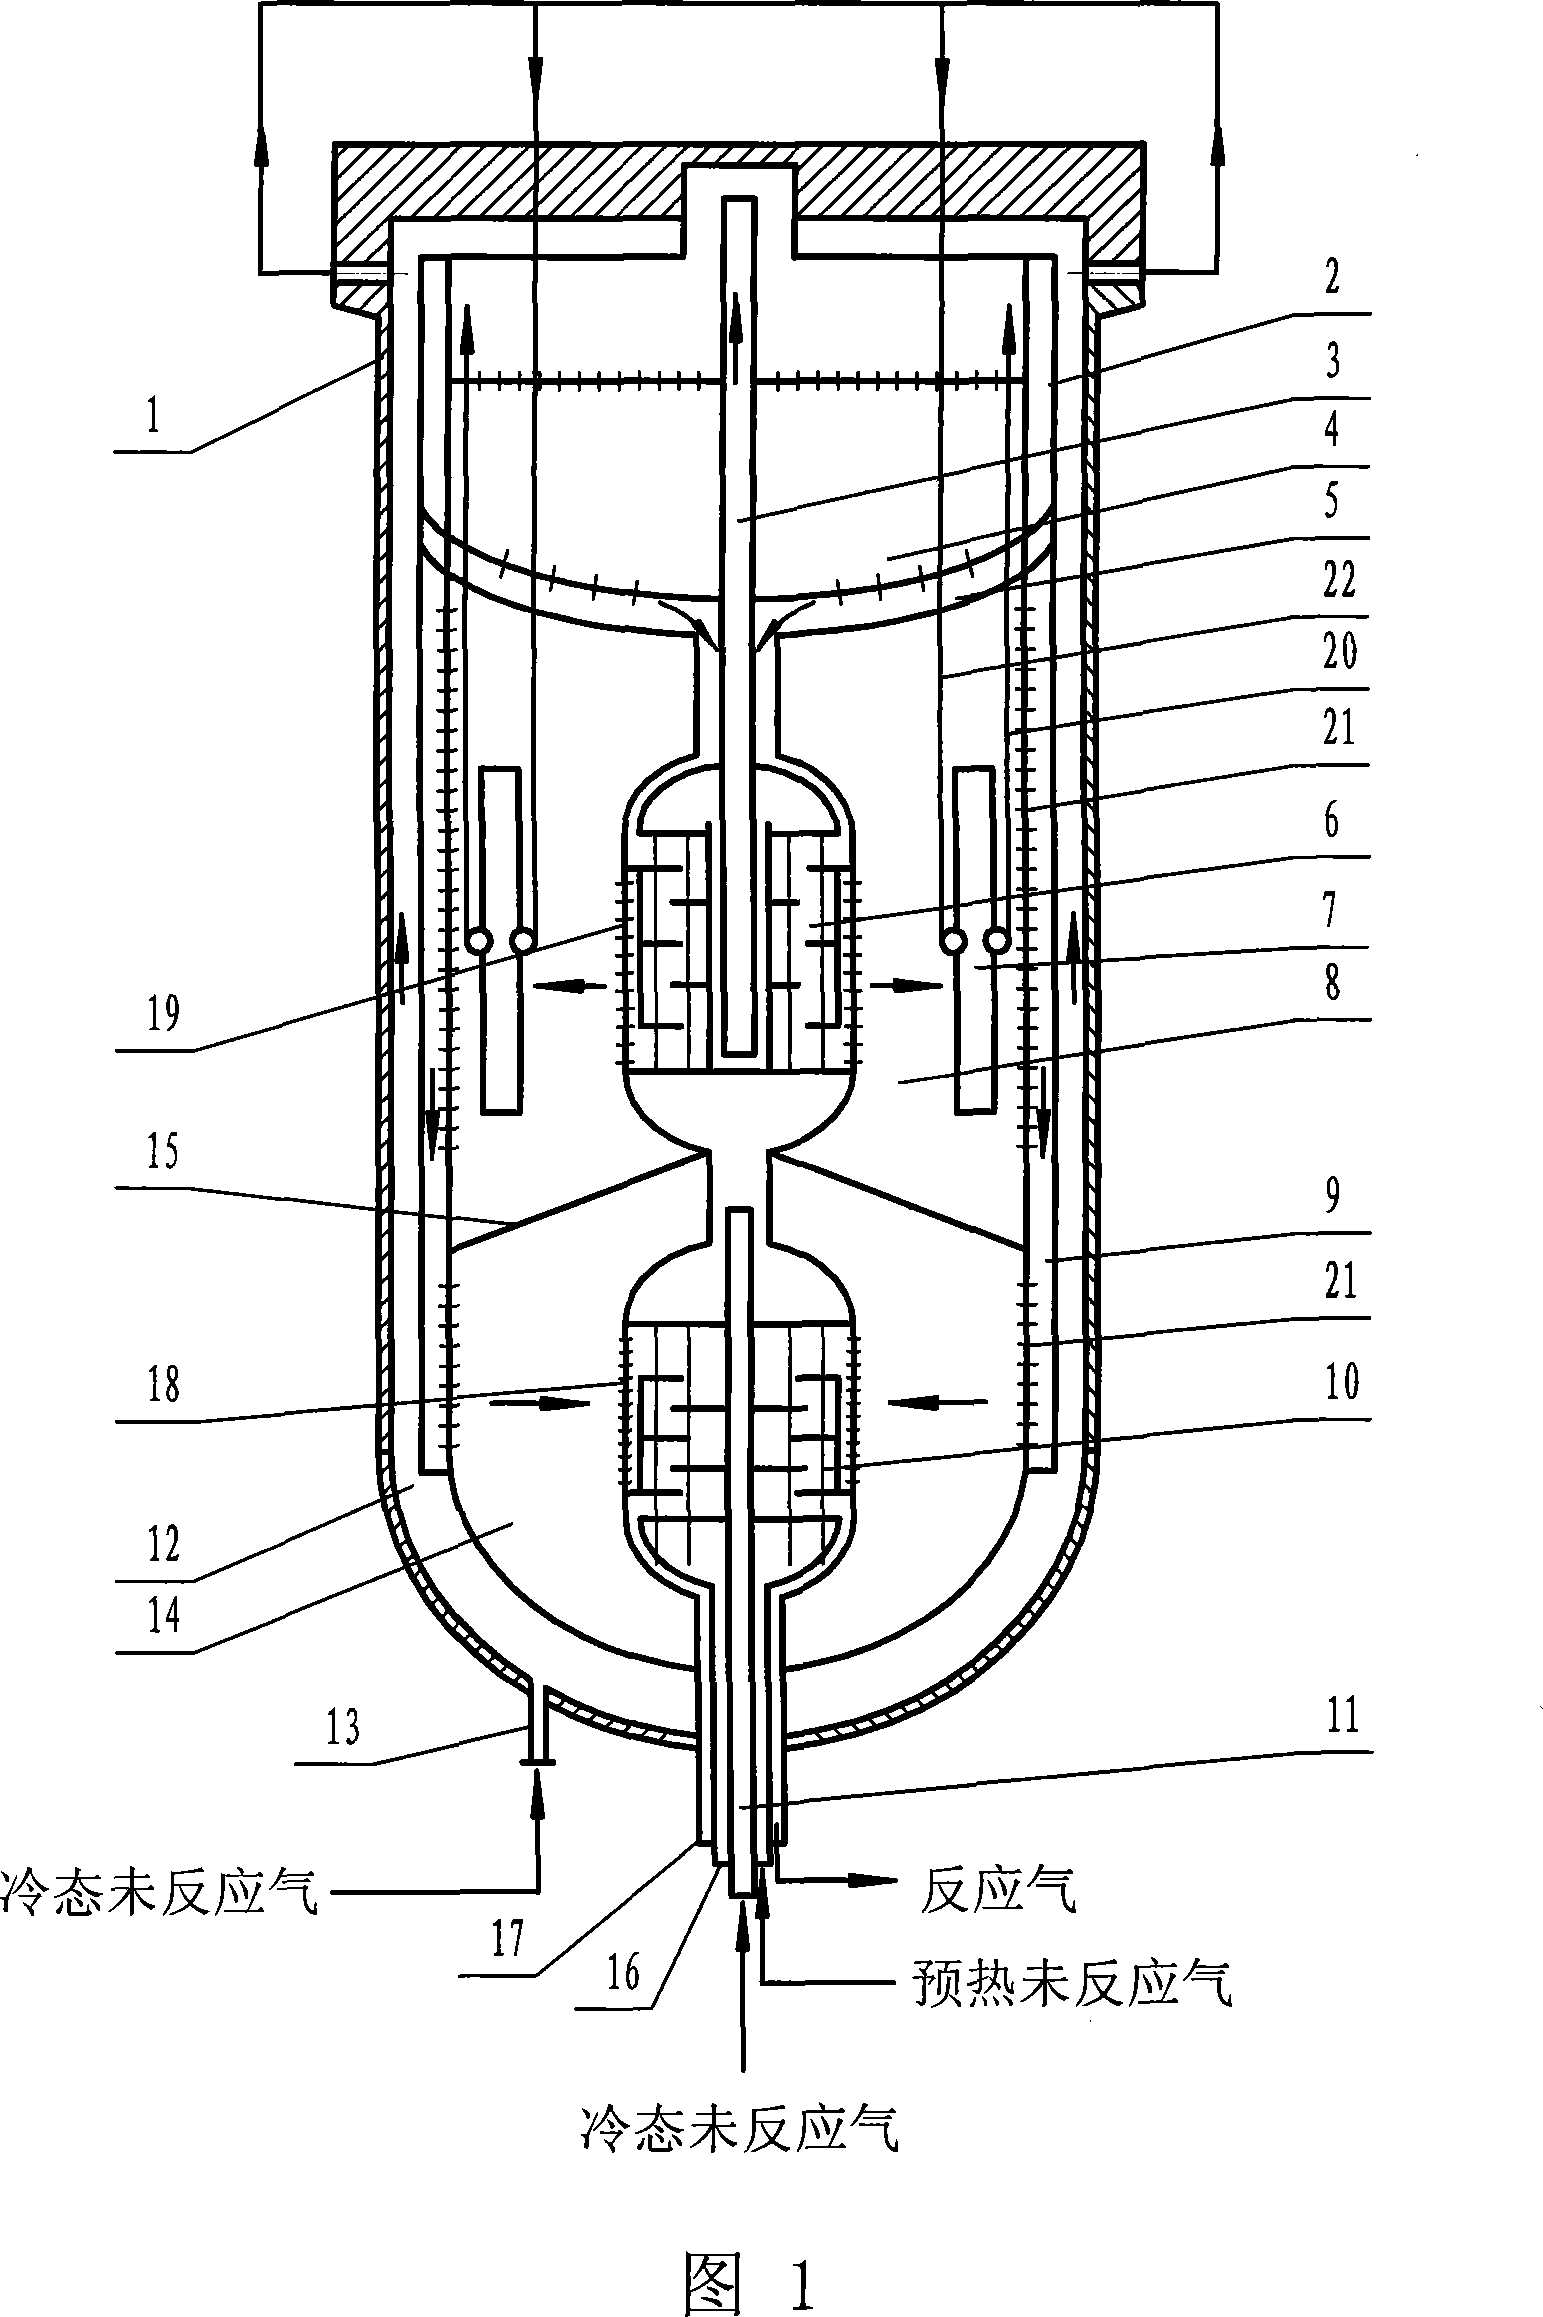 Multi-bed layer shaft radial synthesizing tower